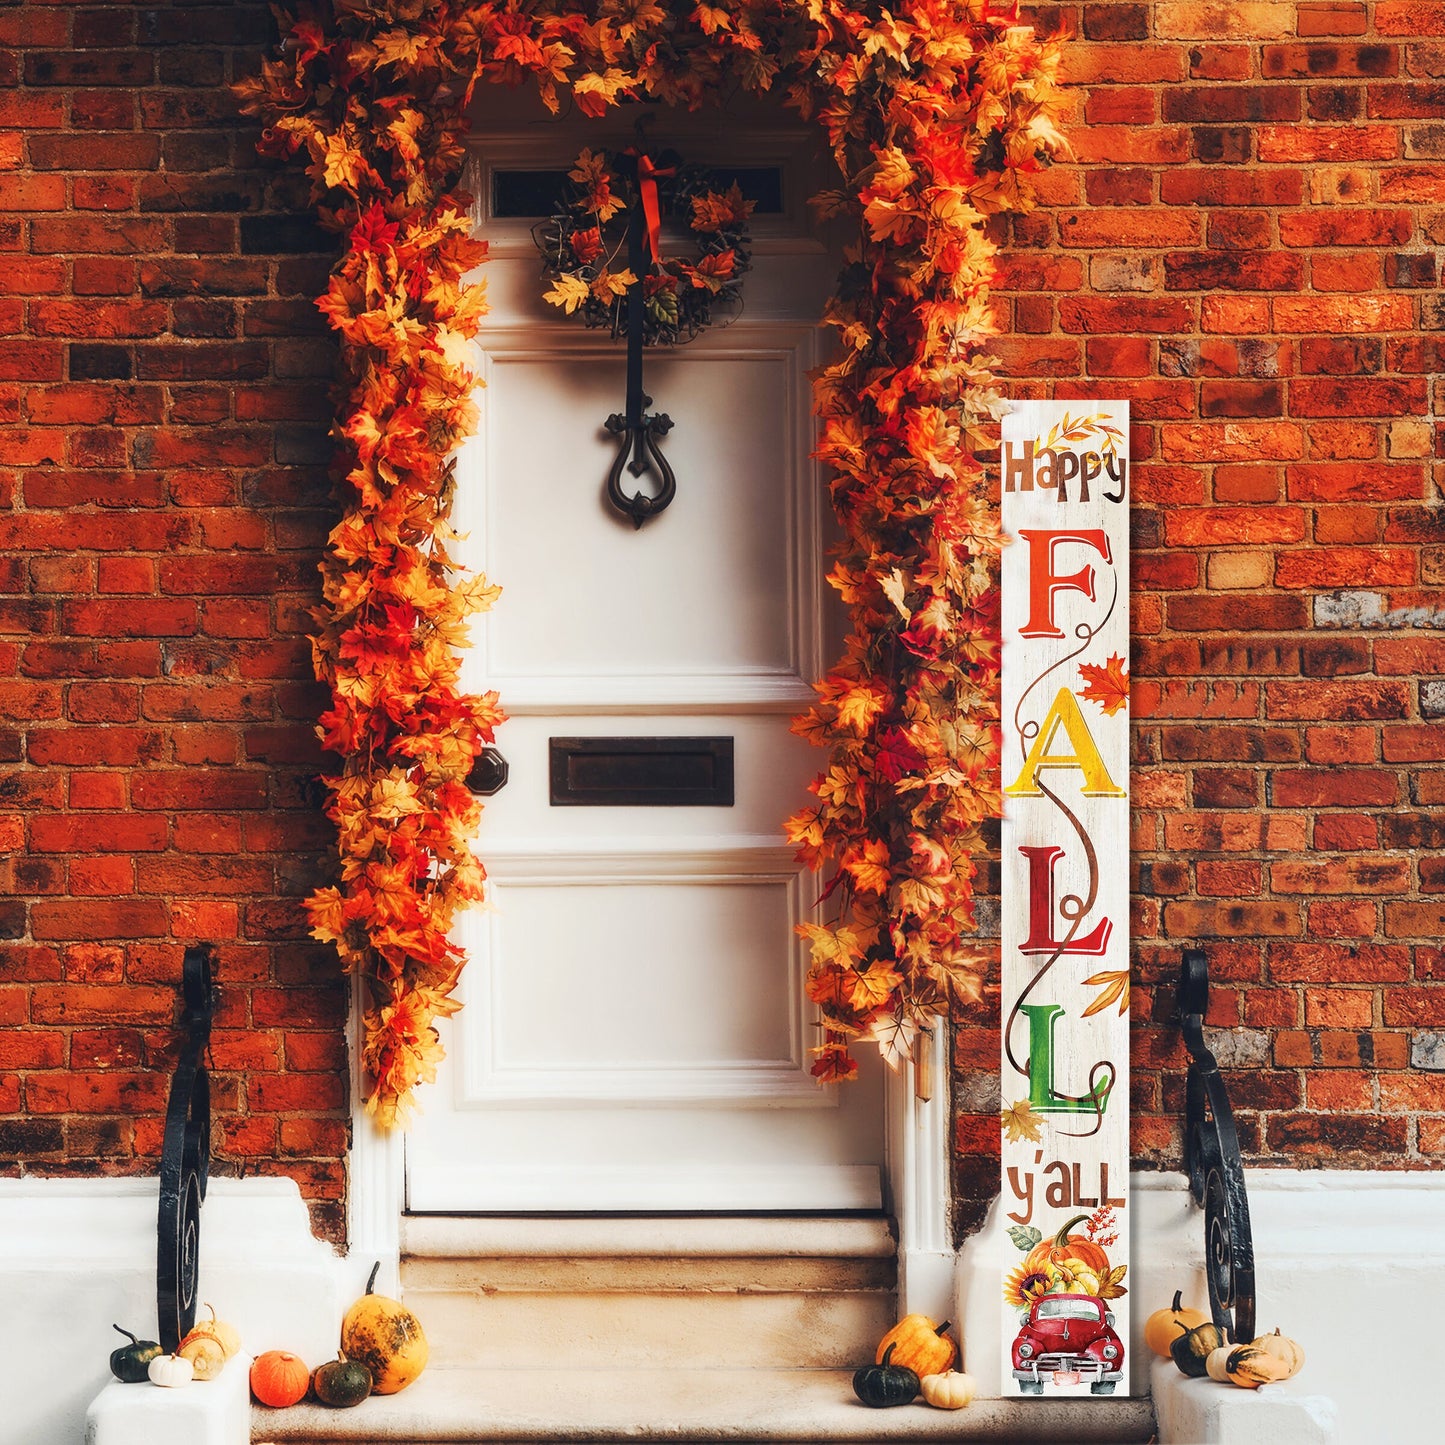 72-Inch Wooden "Happy Fall Y'all" Porch Sign - Seasonal Front Door Decor for Autumn Celebrations